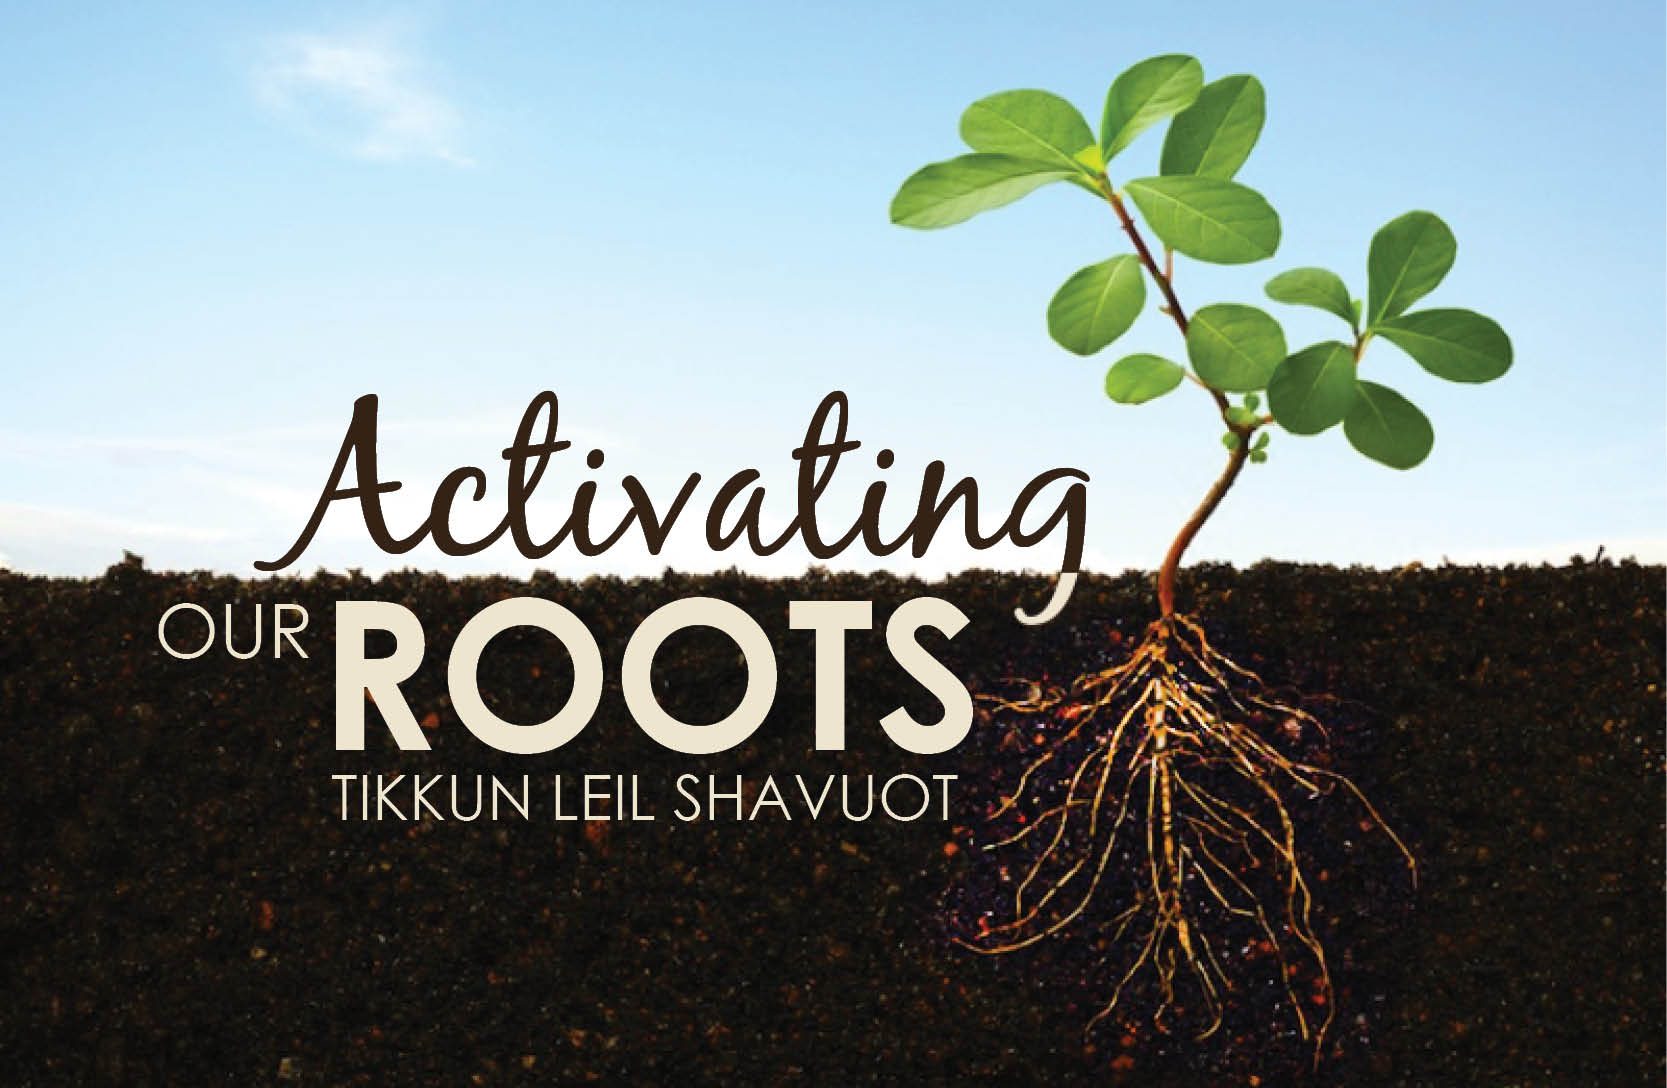 Celebrate Shavuot - The Holiday of the Giving of the Torah